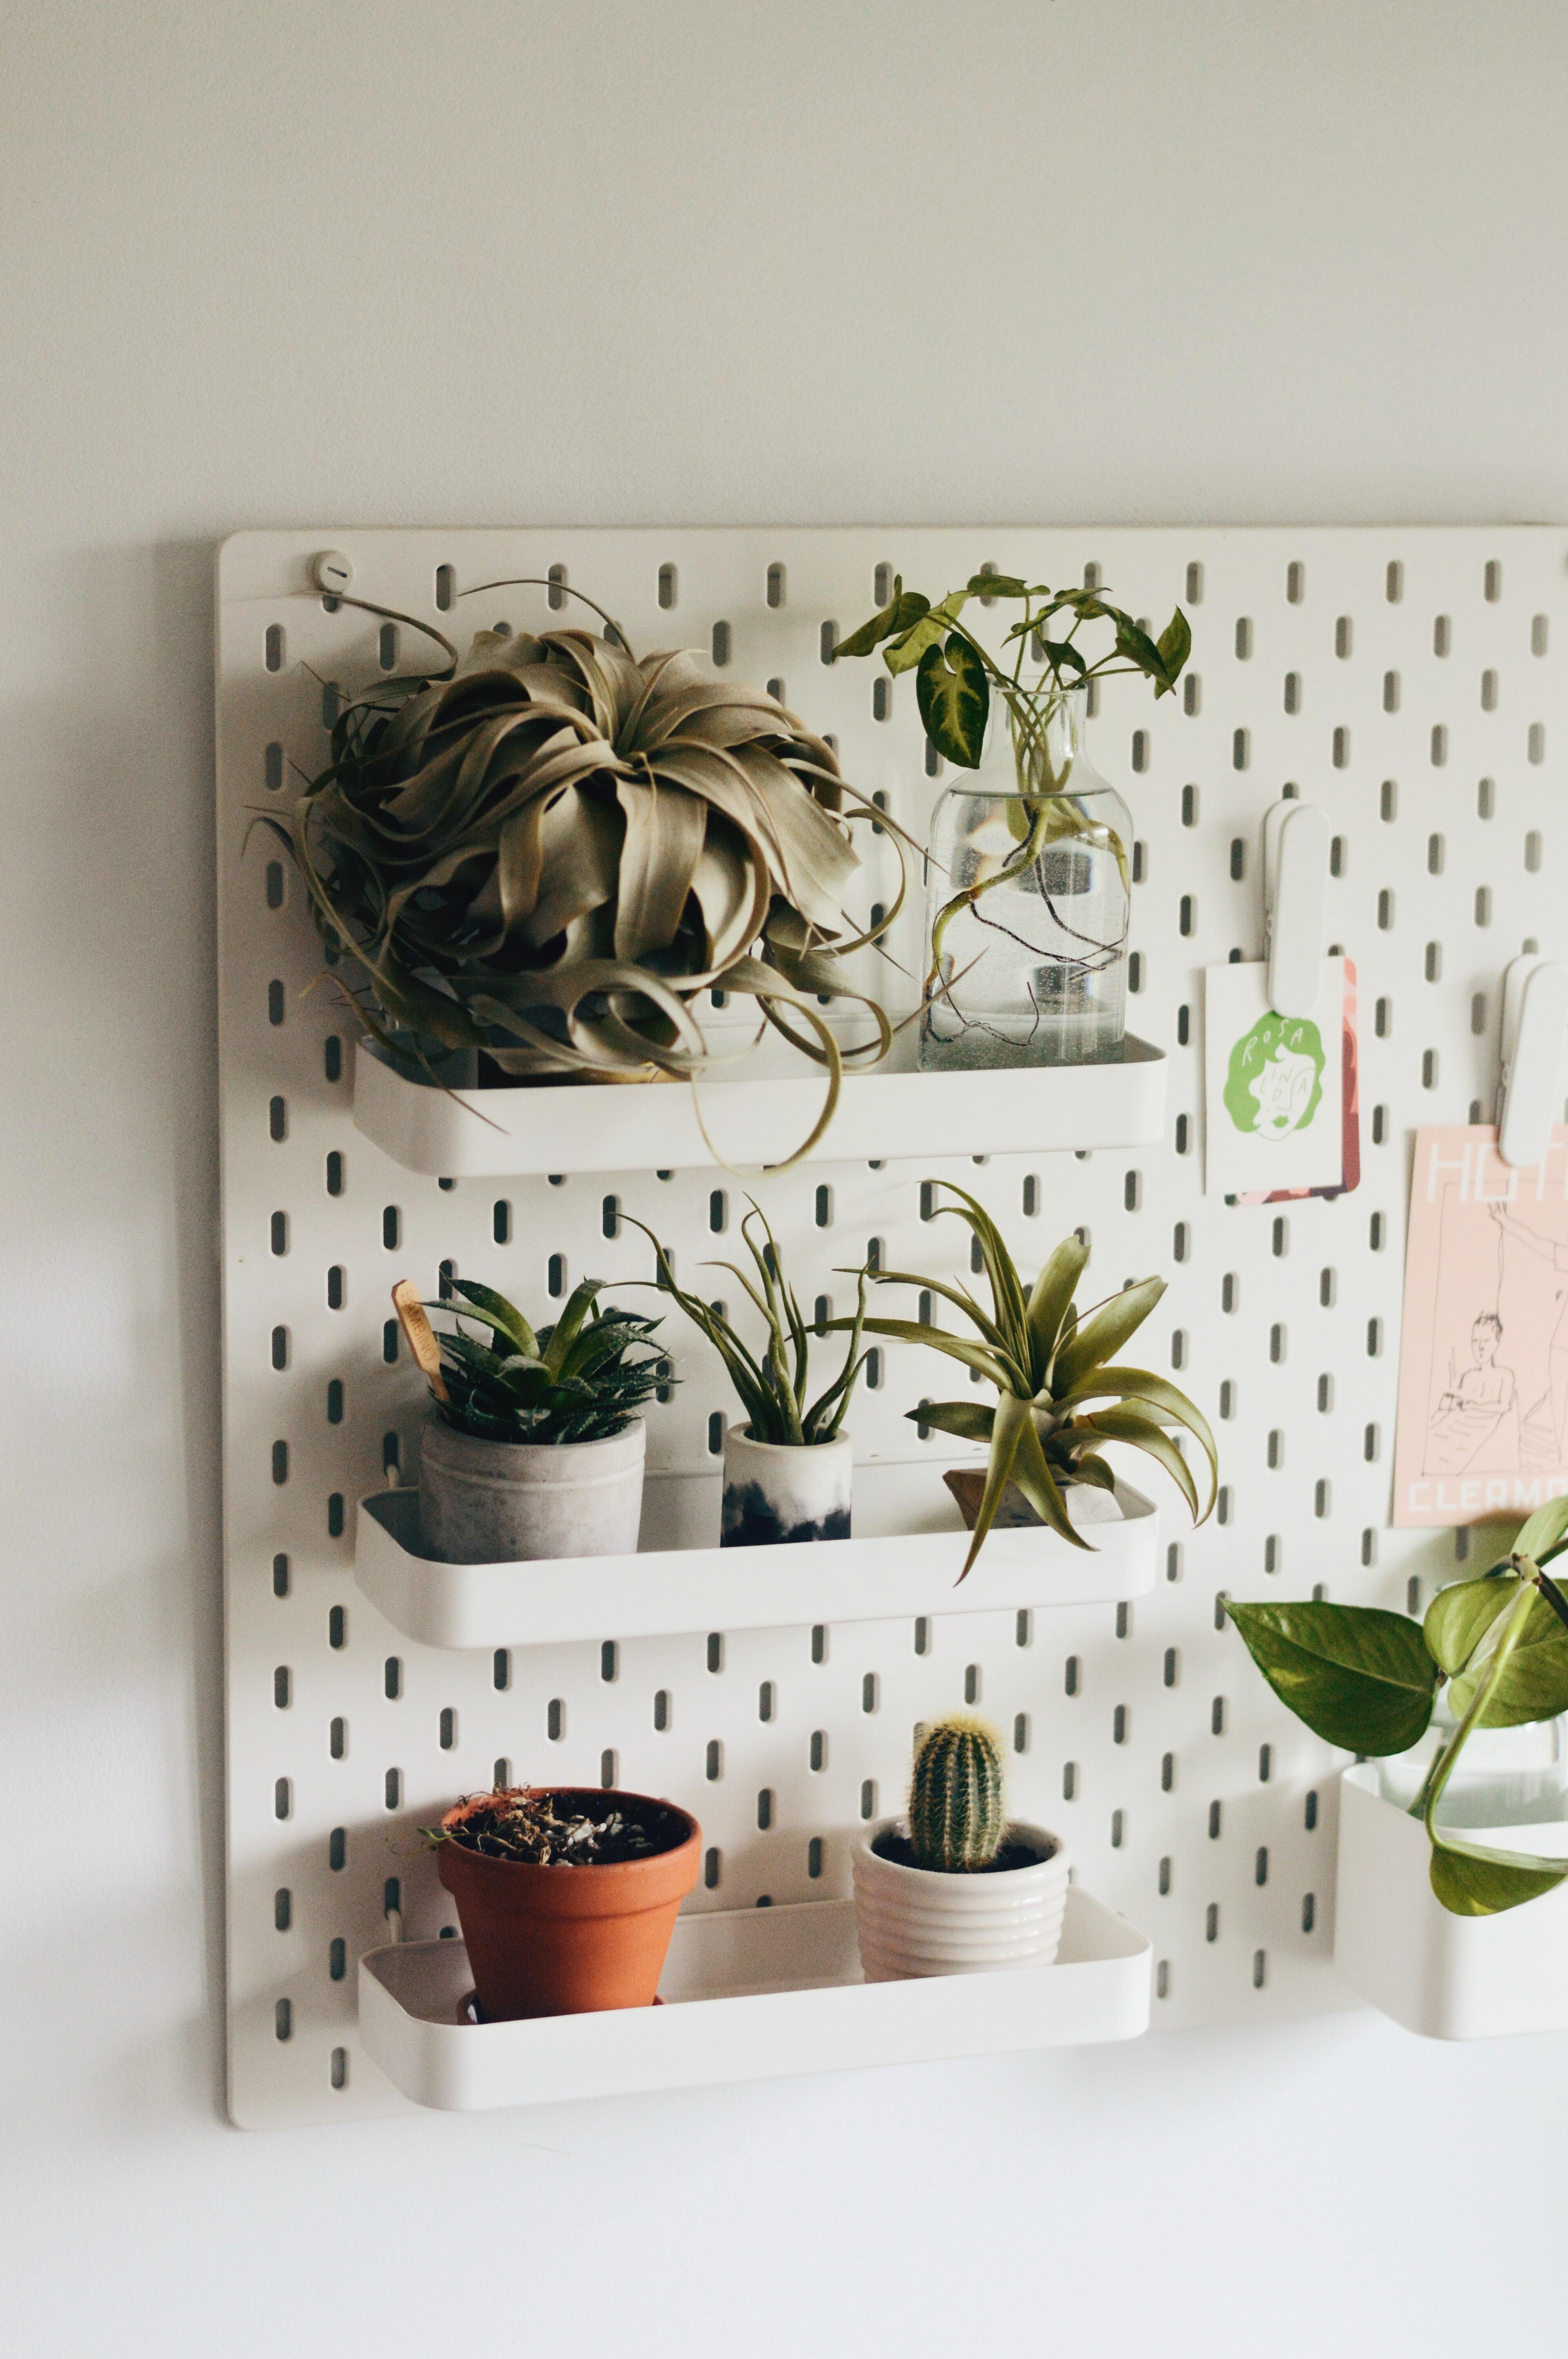 How to have an indoor garden with airplants